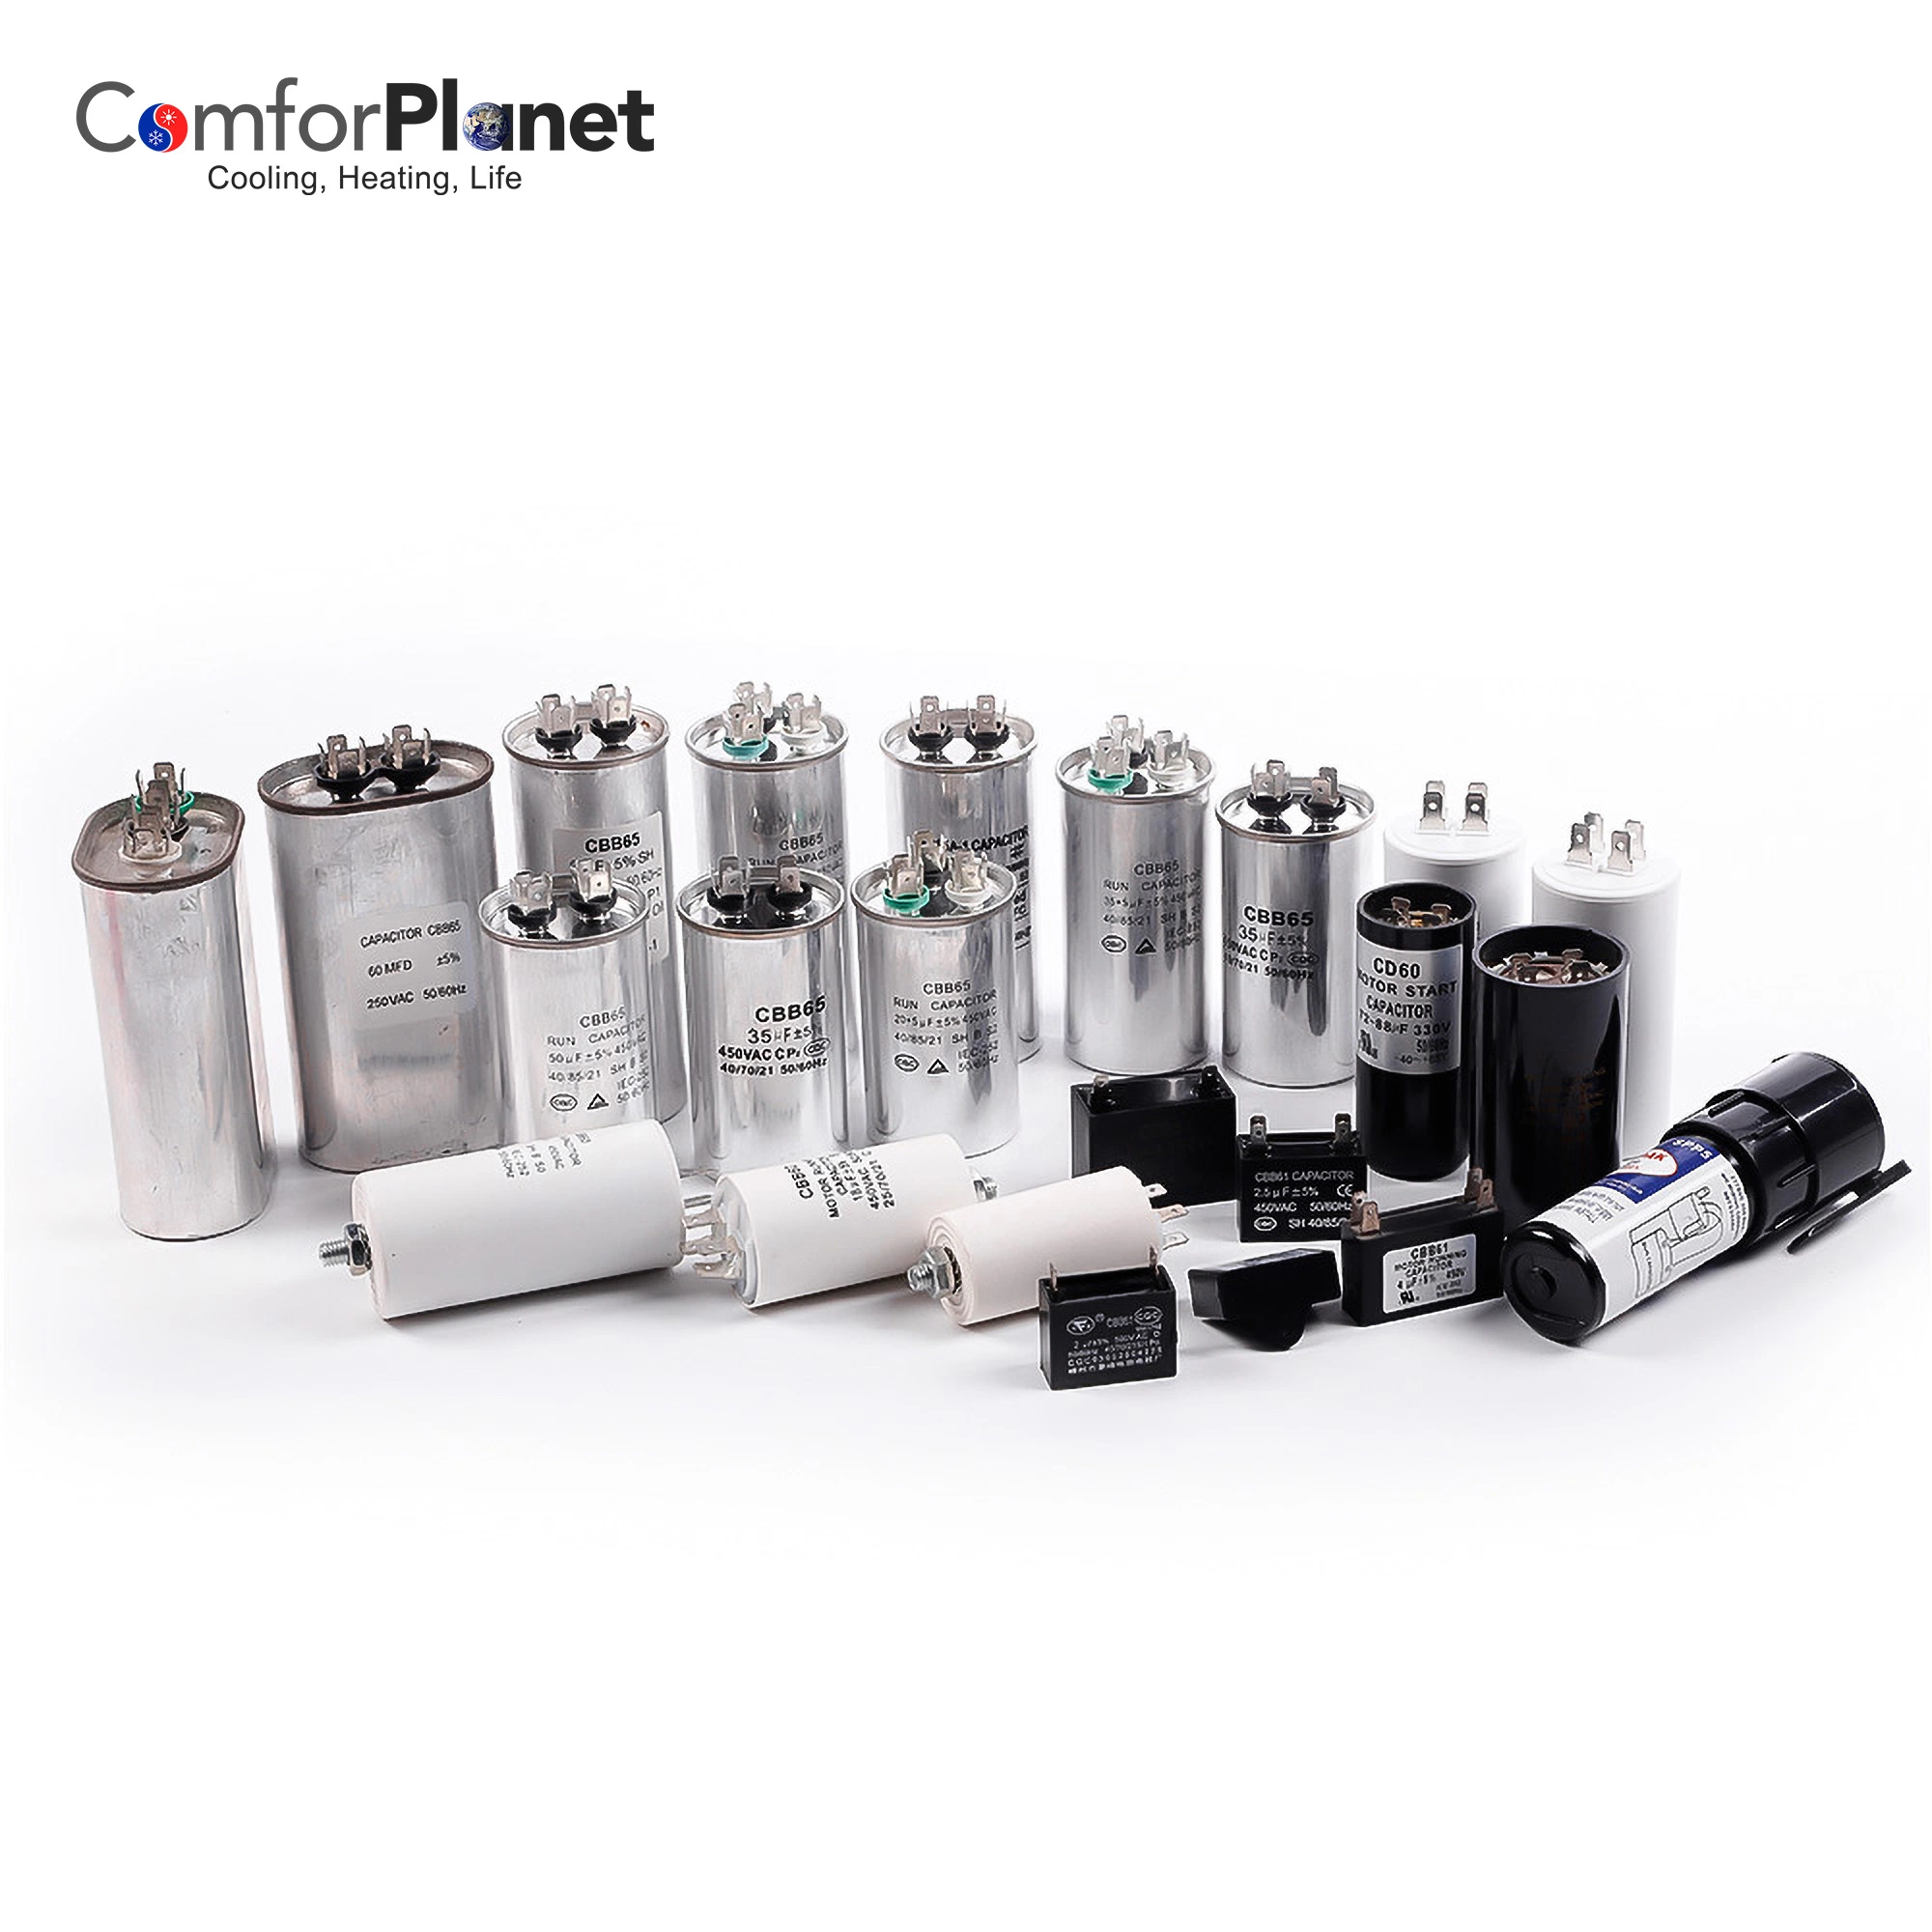 Factory Price Ceiling Fan Capacitor for Fan Motors for Air Conditioning Refrigeration HVAC Manufacturer Cbb61